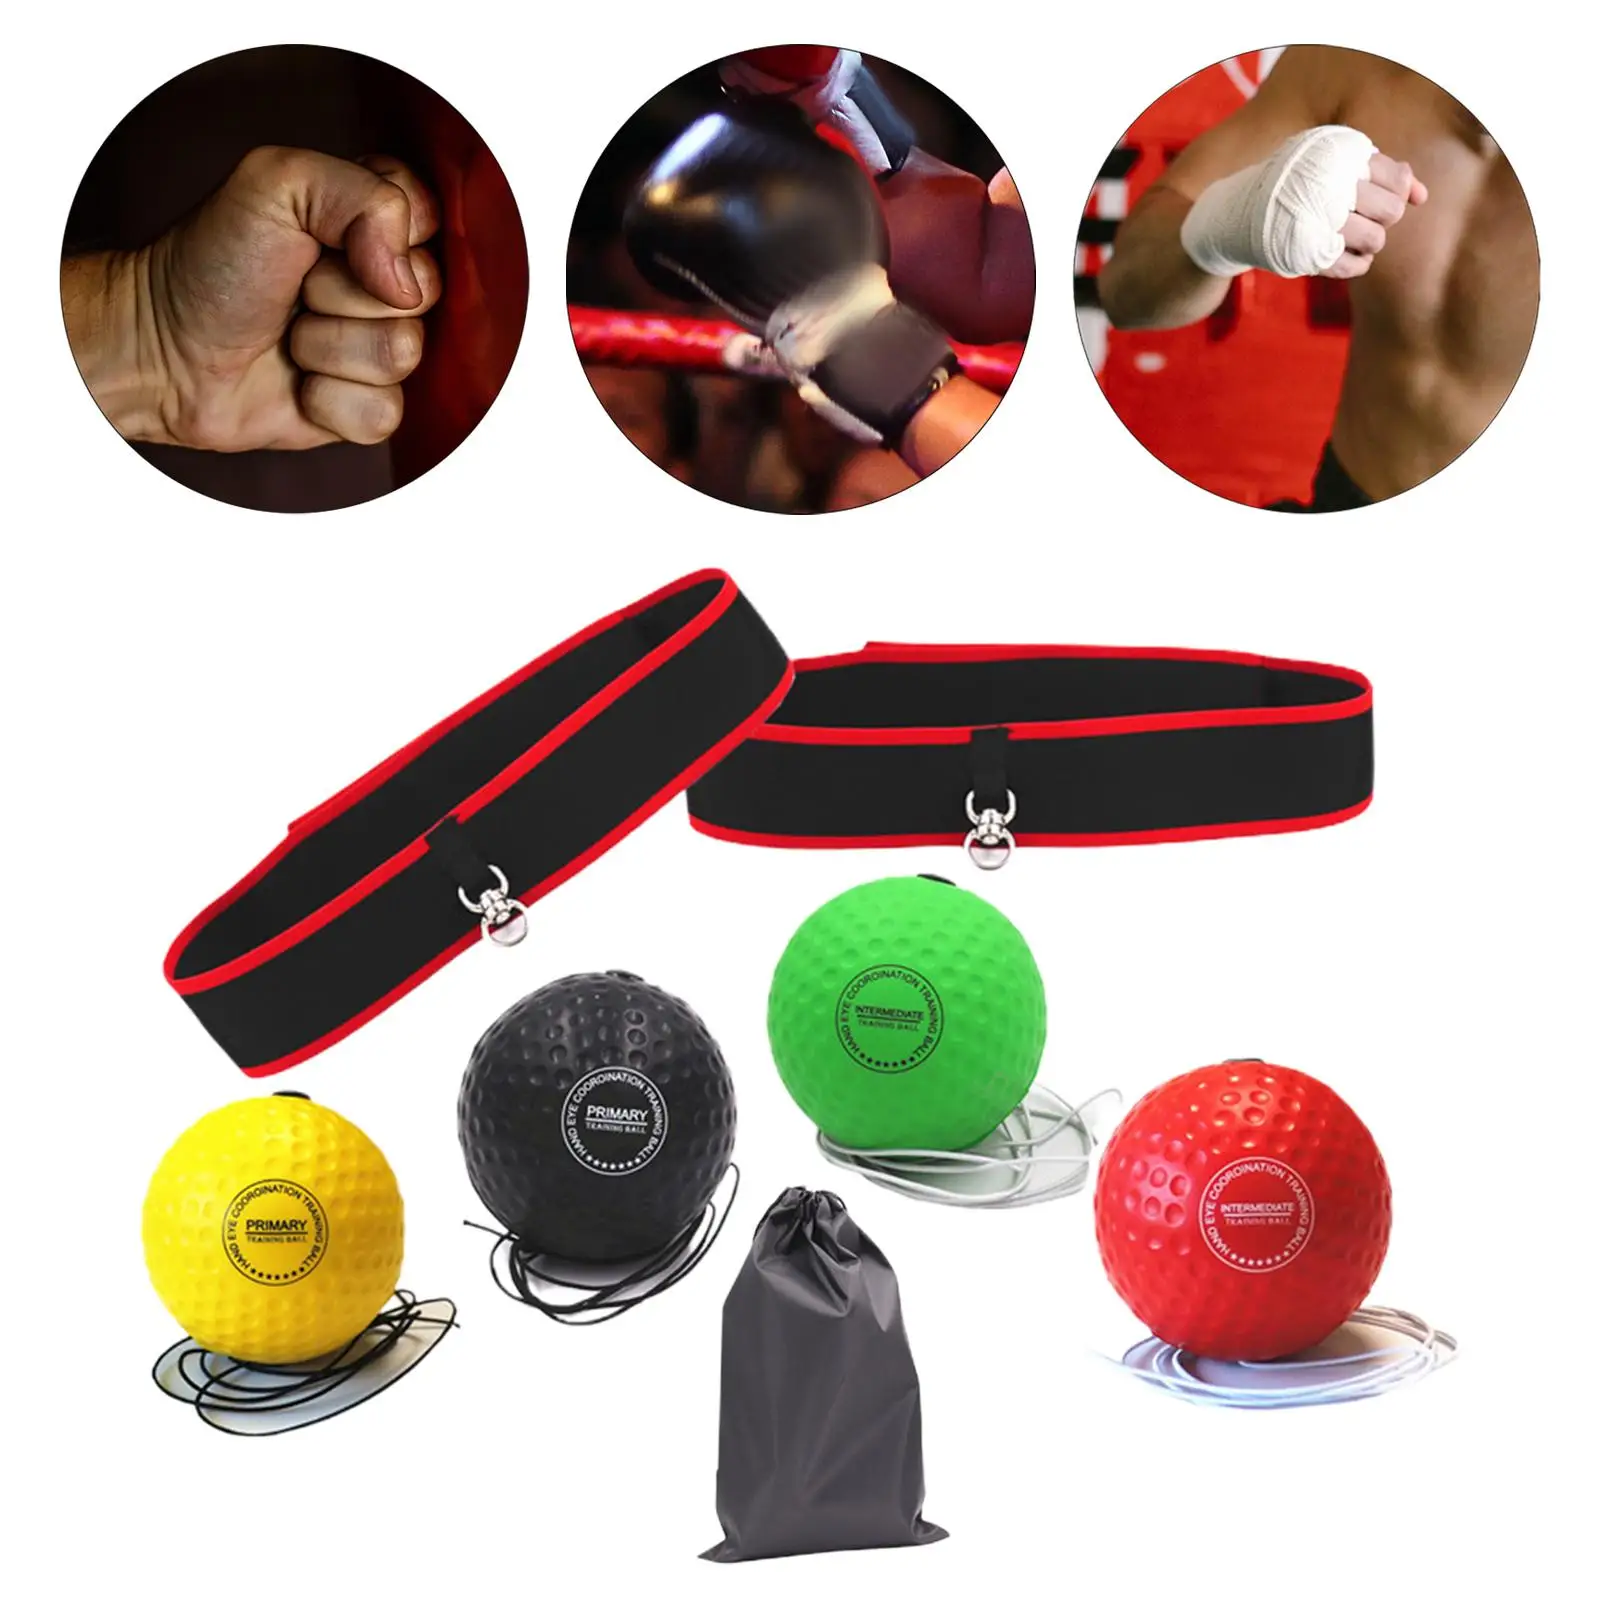 Boxing Reflex Ball Headband Reflex Punching Ball Hand Eye Coordination Training Adjustable for Workout Exercise Mma Home Gym